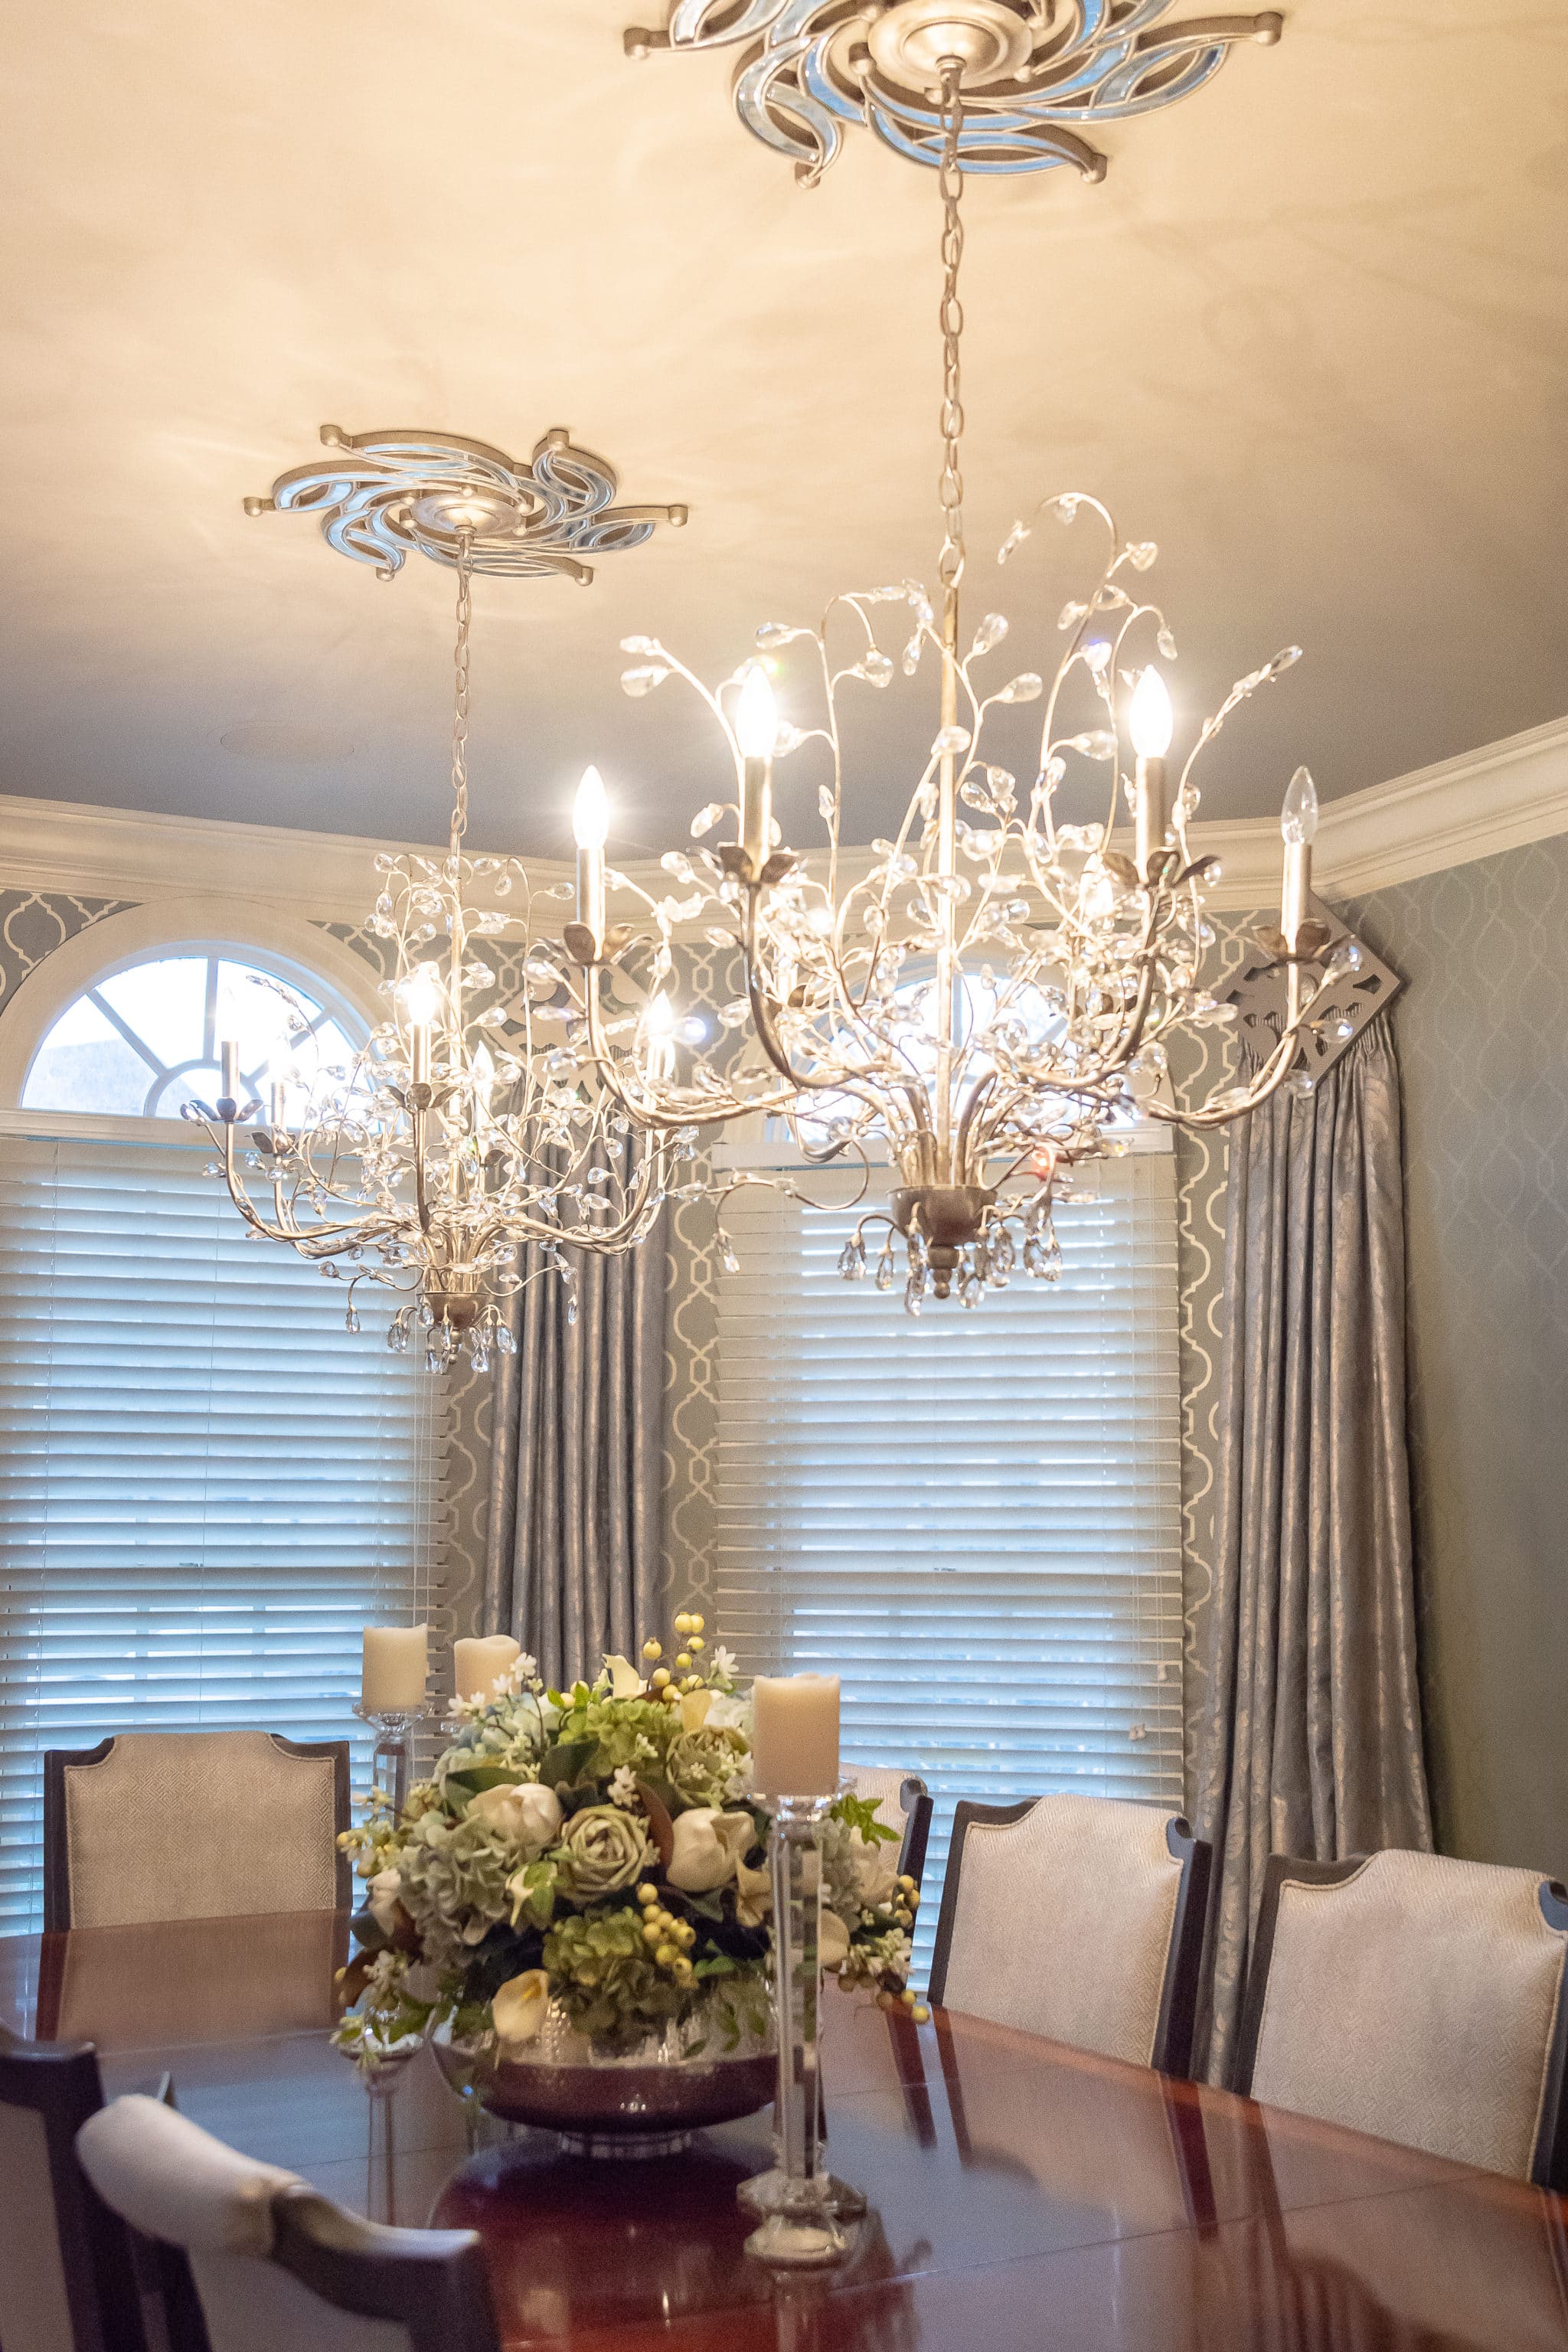 Designing A Formal Dining Room with Sophisticated Shine - JSB Designs